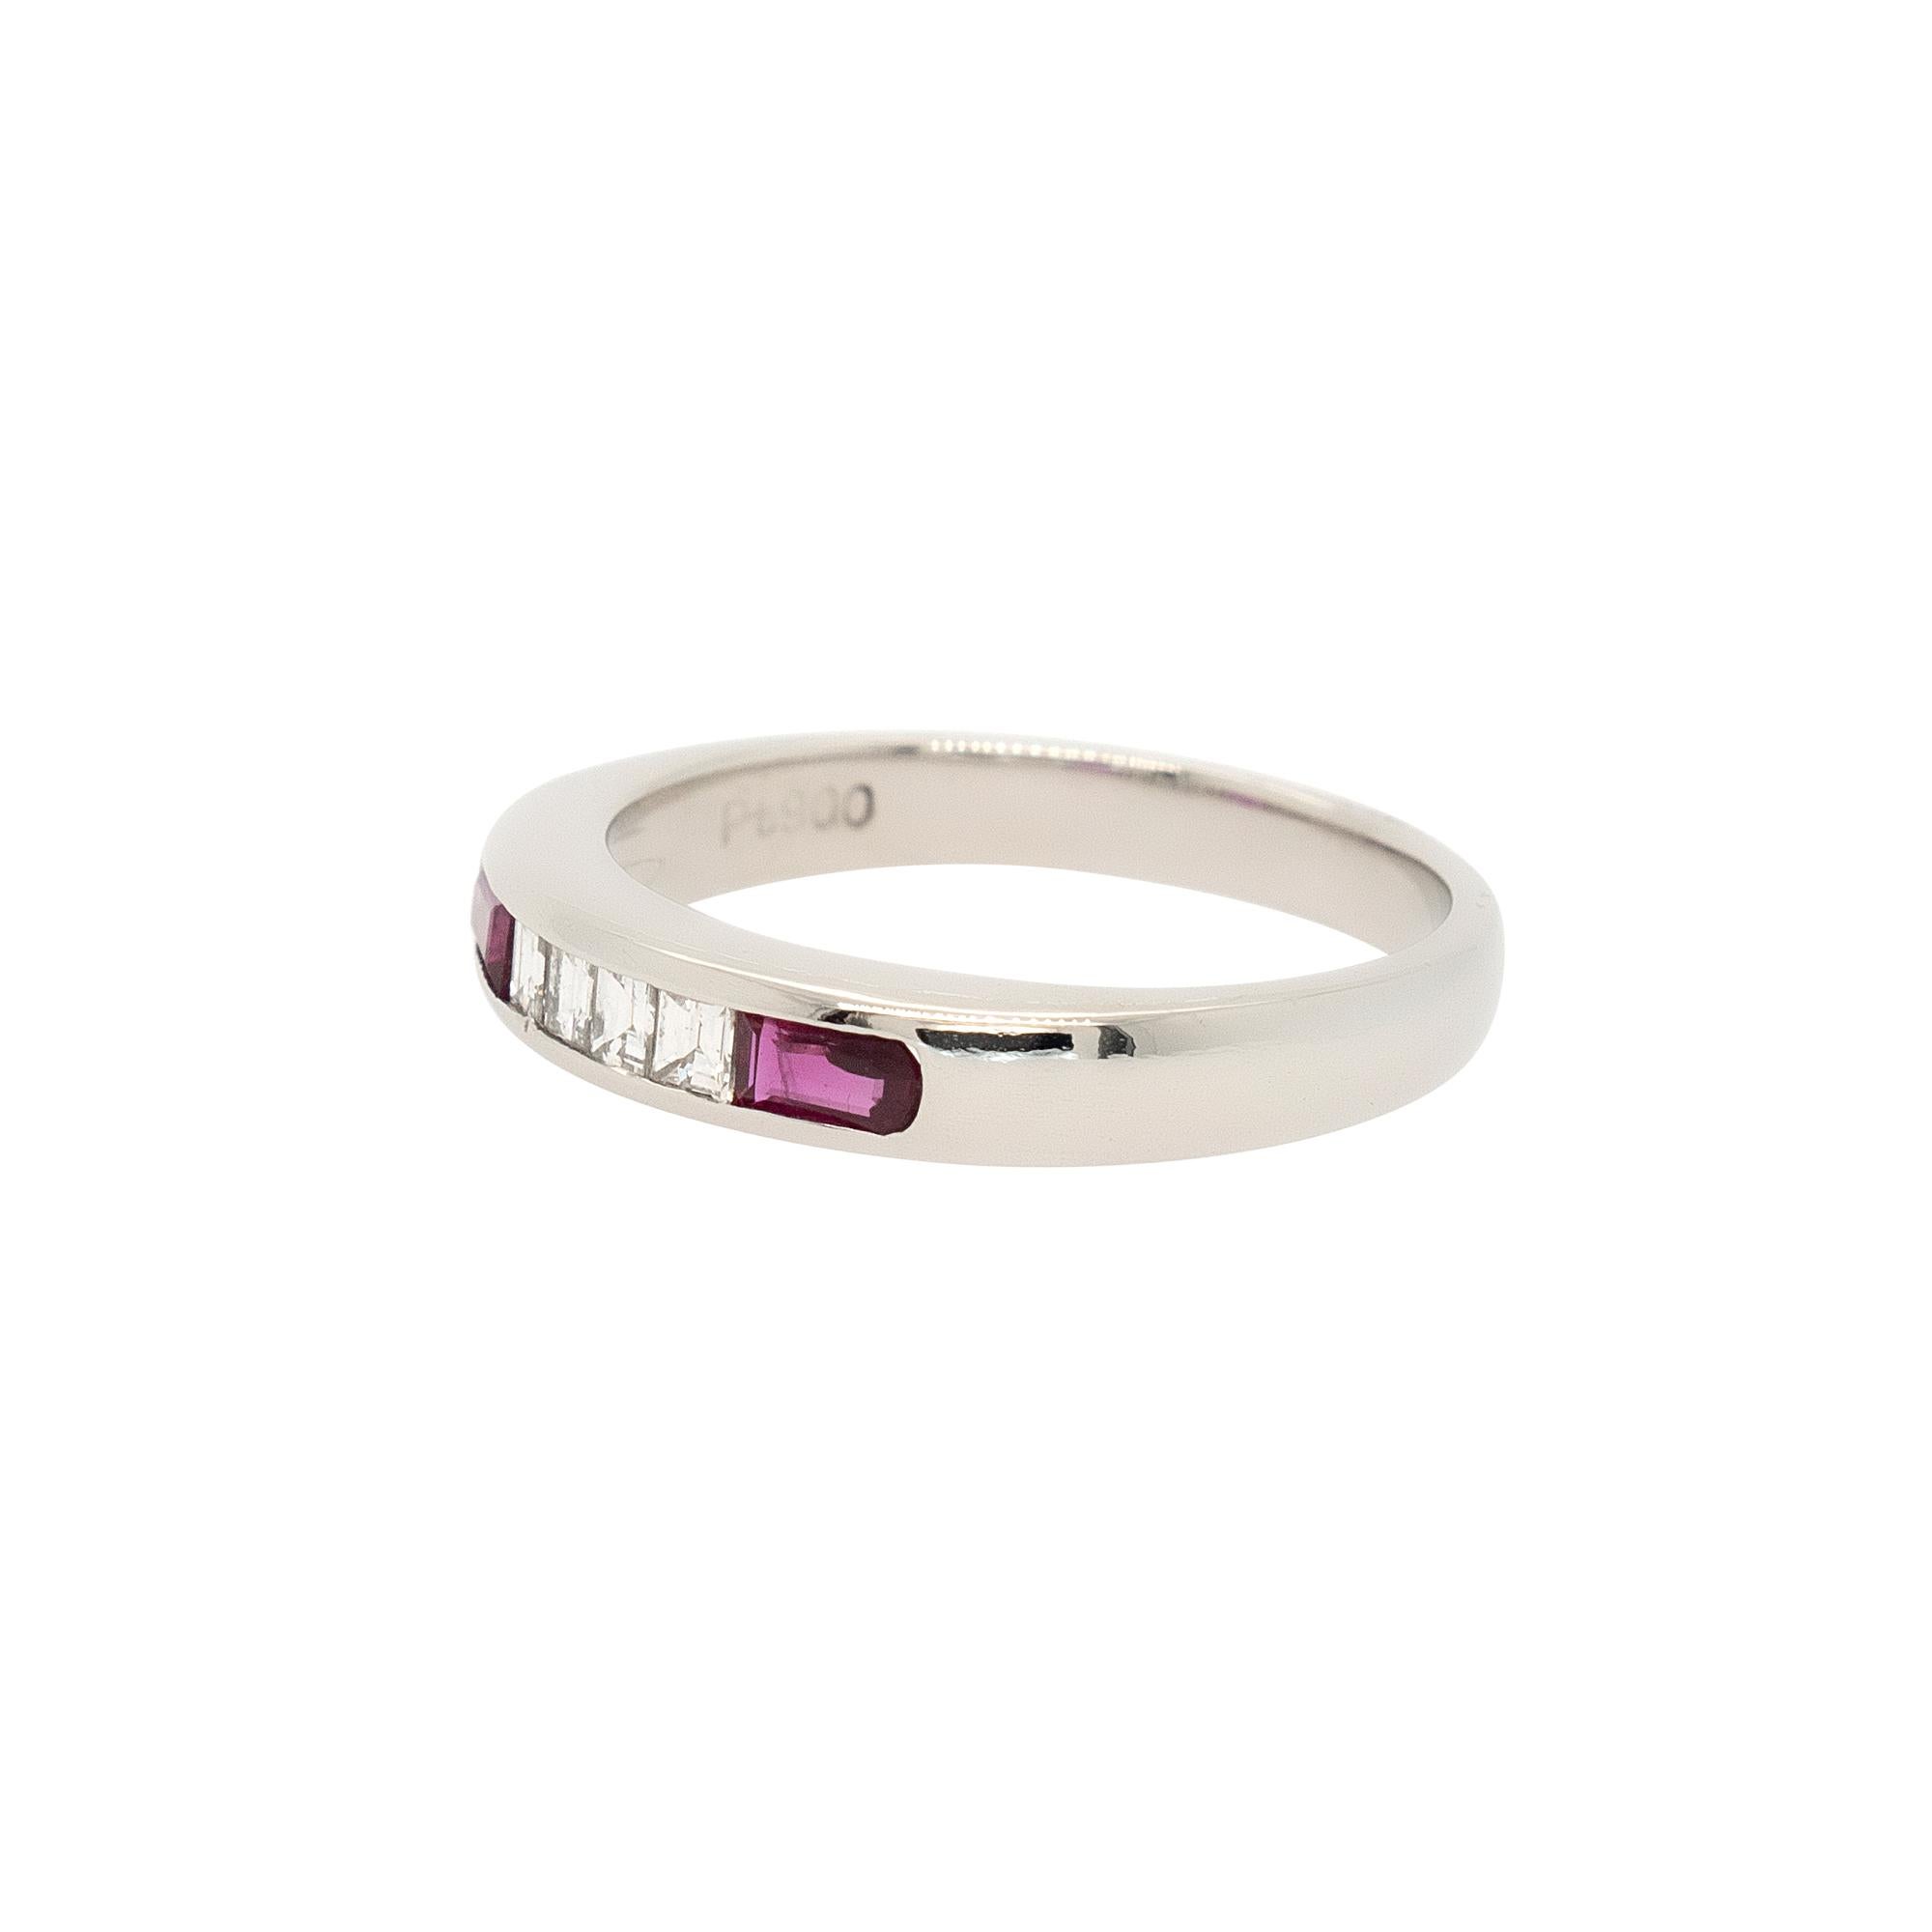 Center Details: 
Approx Diamond: 0.16ctw
Approx Ruby: 0.30ctw
Ring Material: Platinum
Ring Size:n6.25 (can be sized)
Total Weight: 4.9g (3.2dwt)
This item comes with a presentation box!
SKU: R5458

Elevate your style with this platinum band ring.